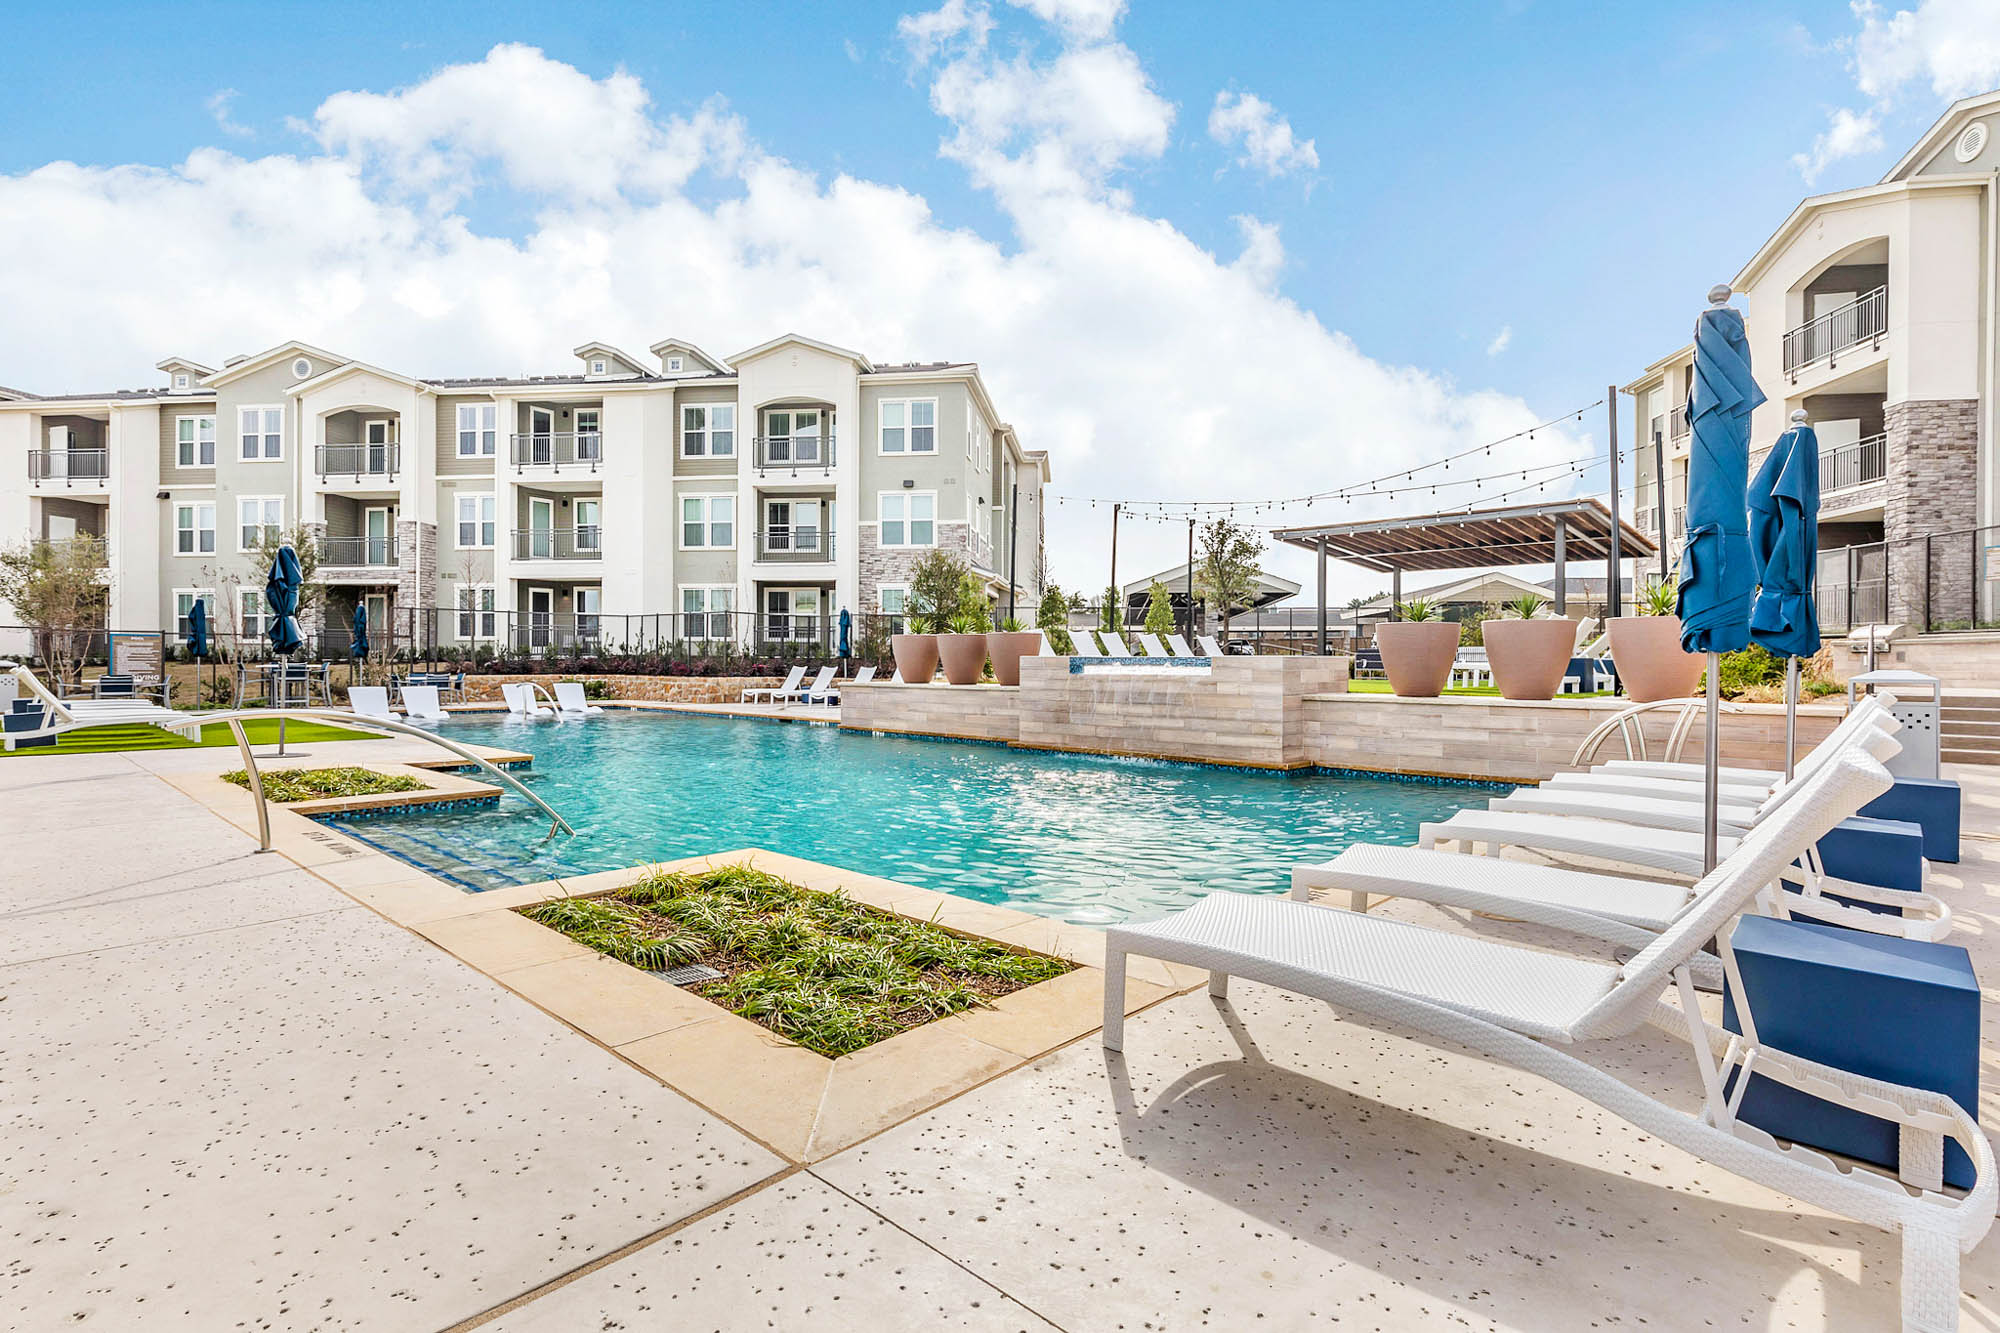 The exterior of an apartment building with a pool at Embree Hill in Dallas, TX.